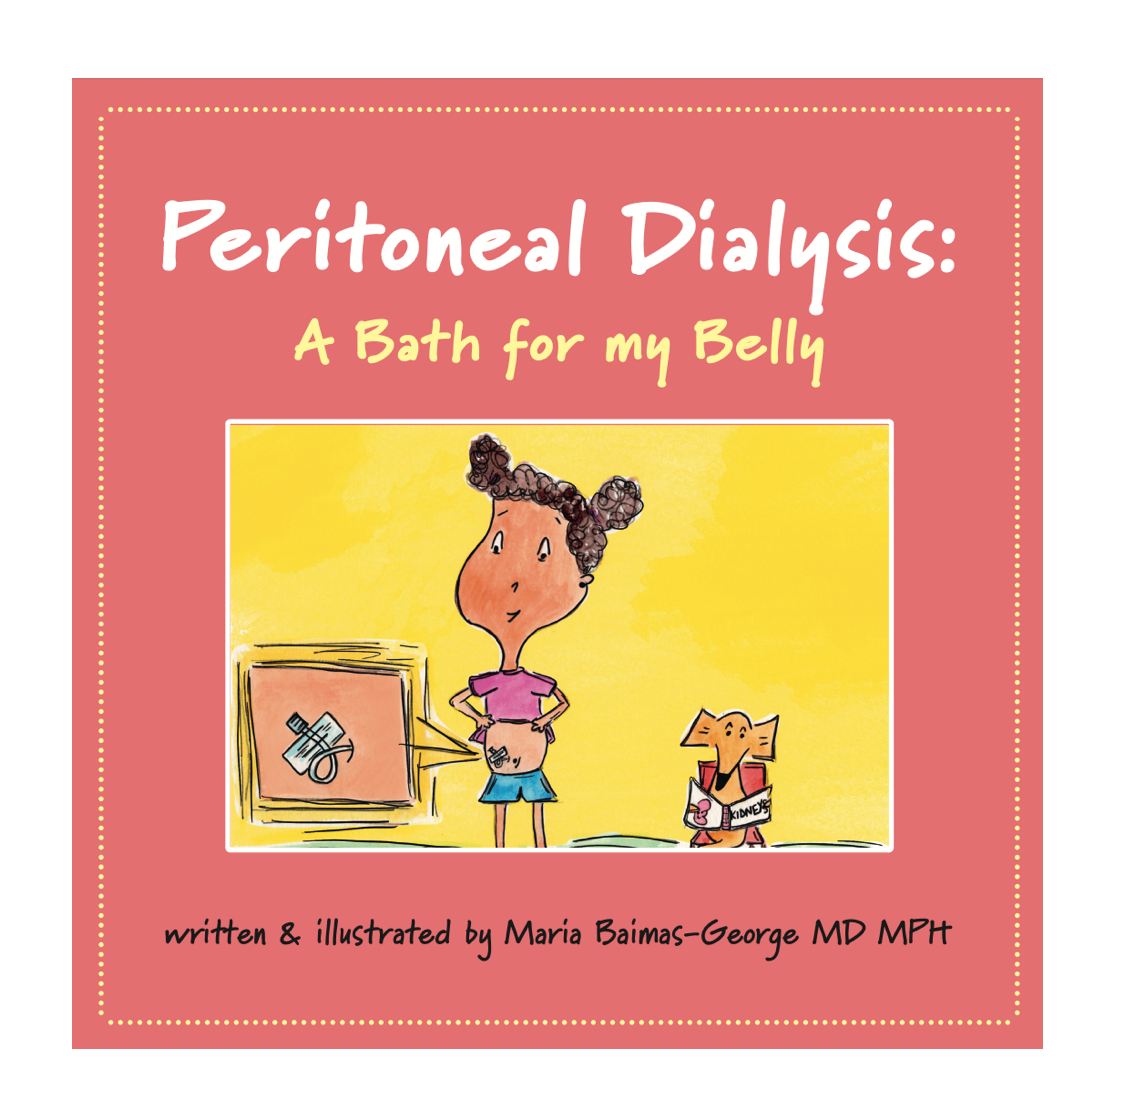 Peritoneal Dialysis: A Bath for my Belly